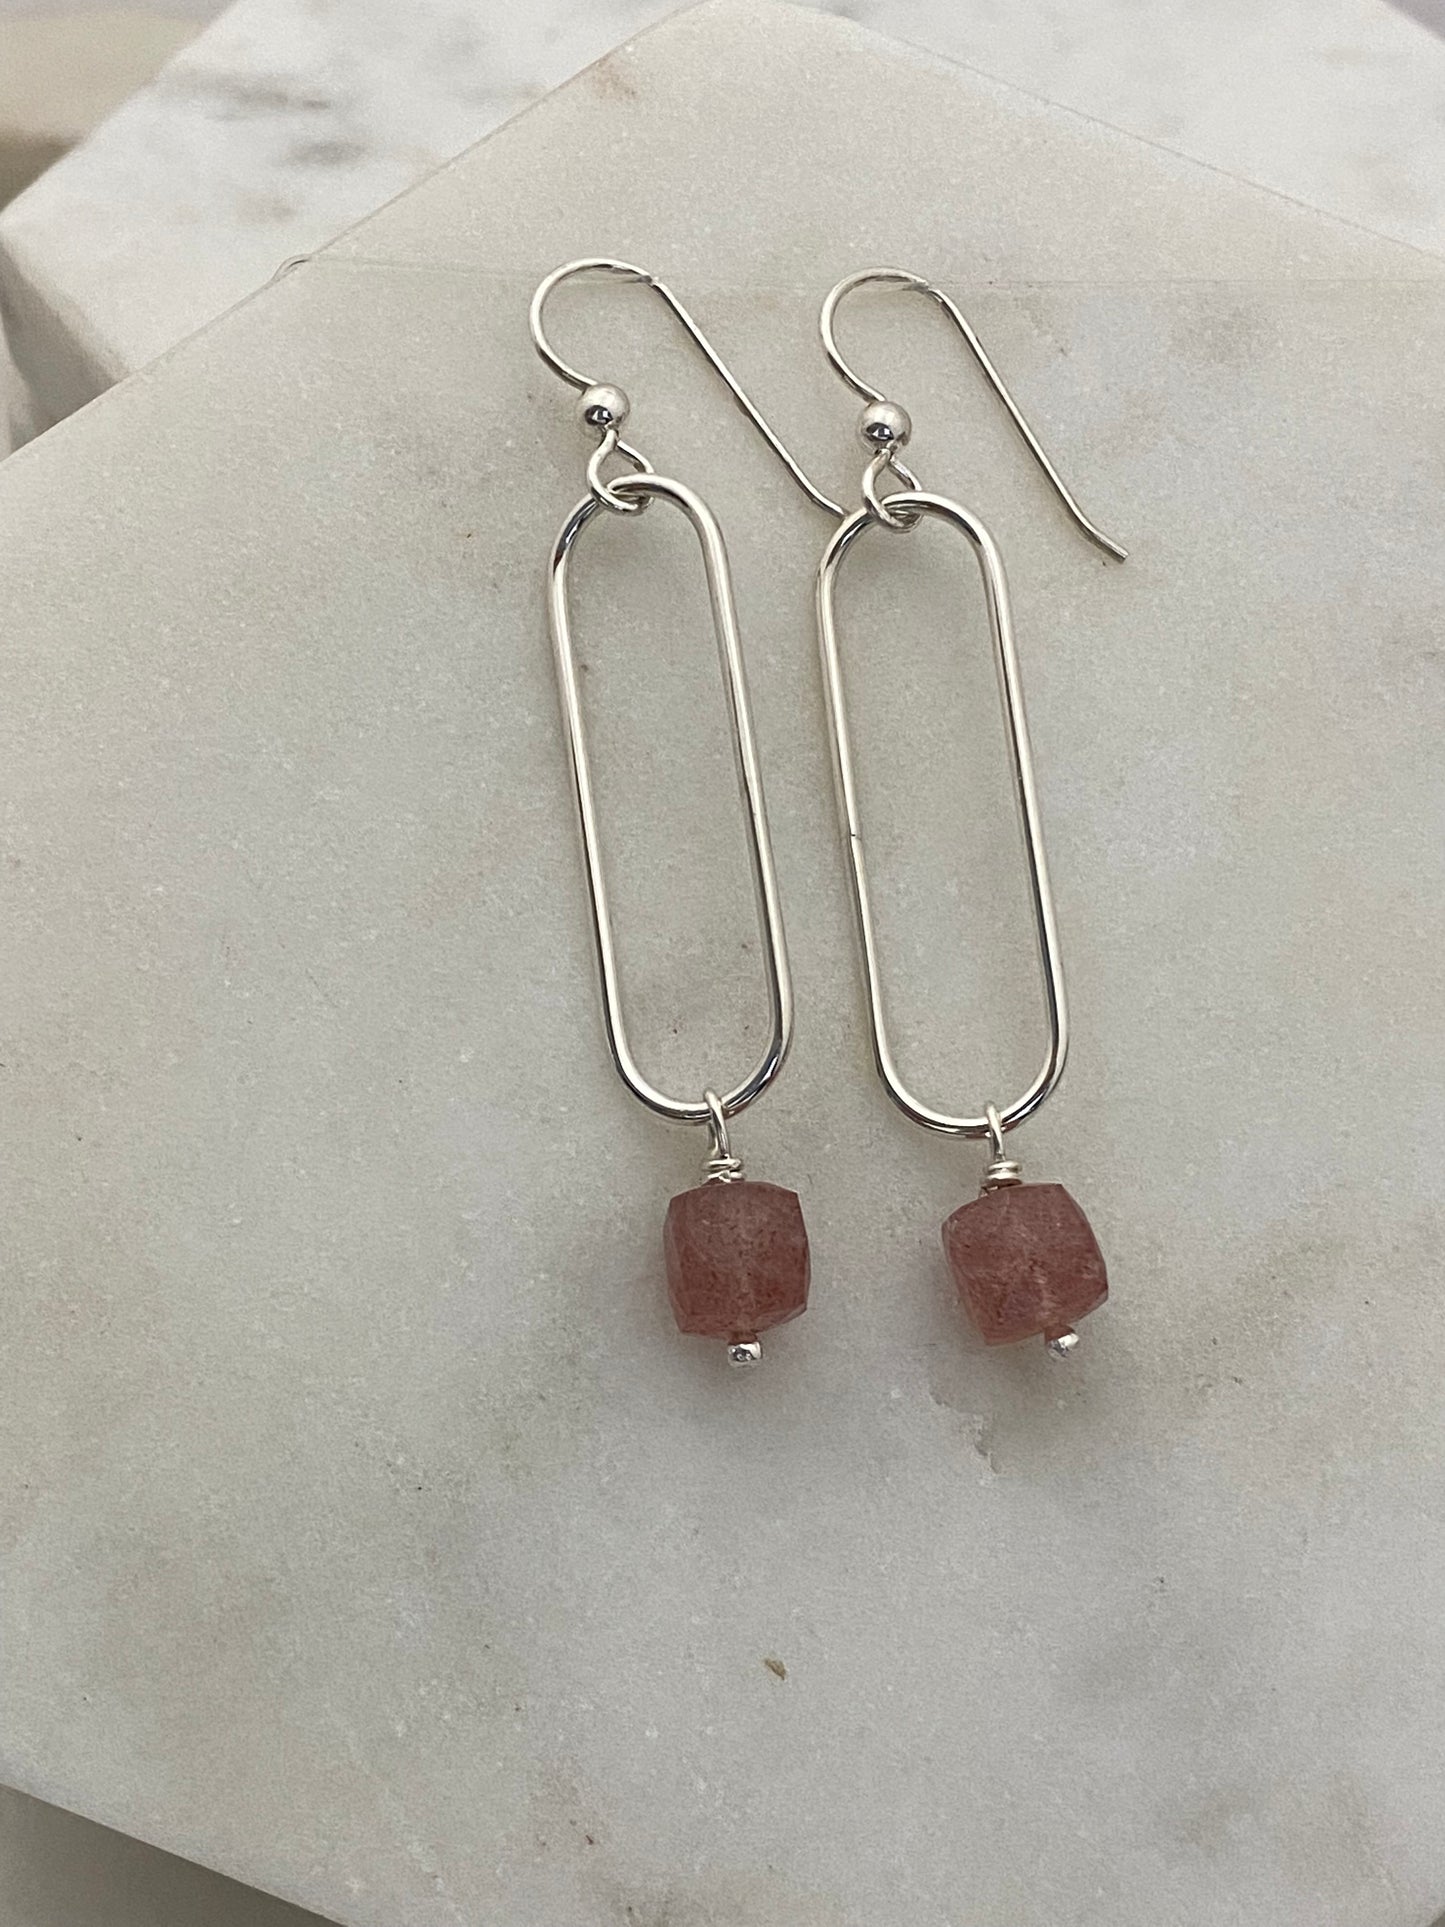 Sterling silver forged earrings with strawberry quartz gemstones